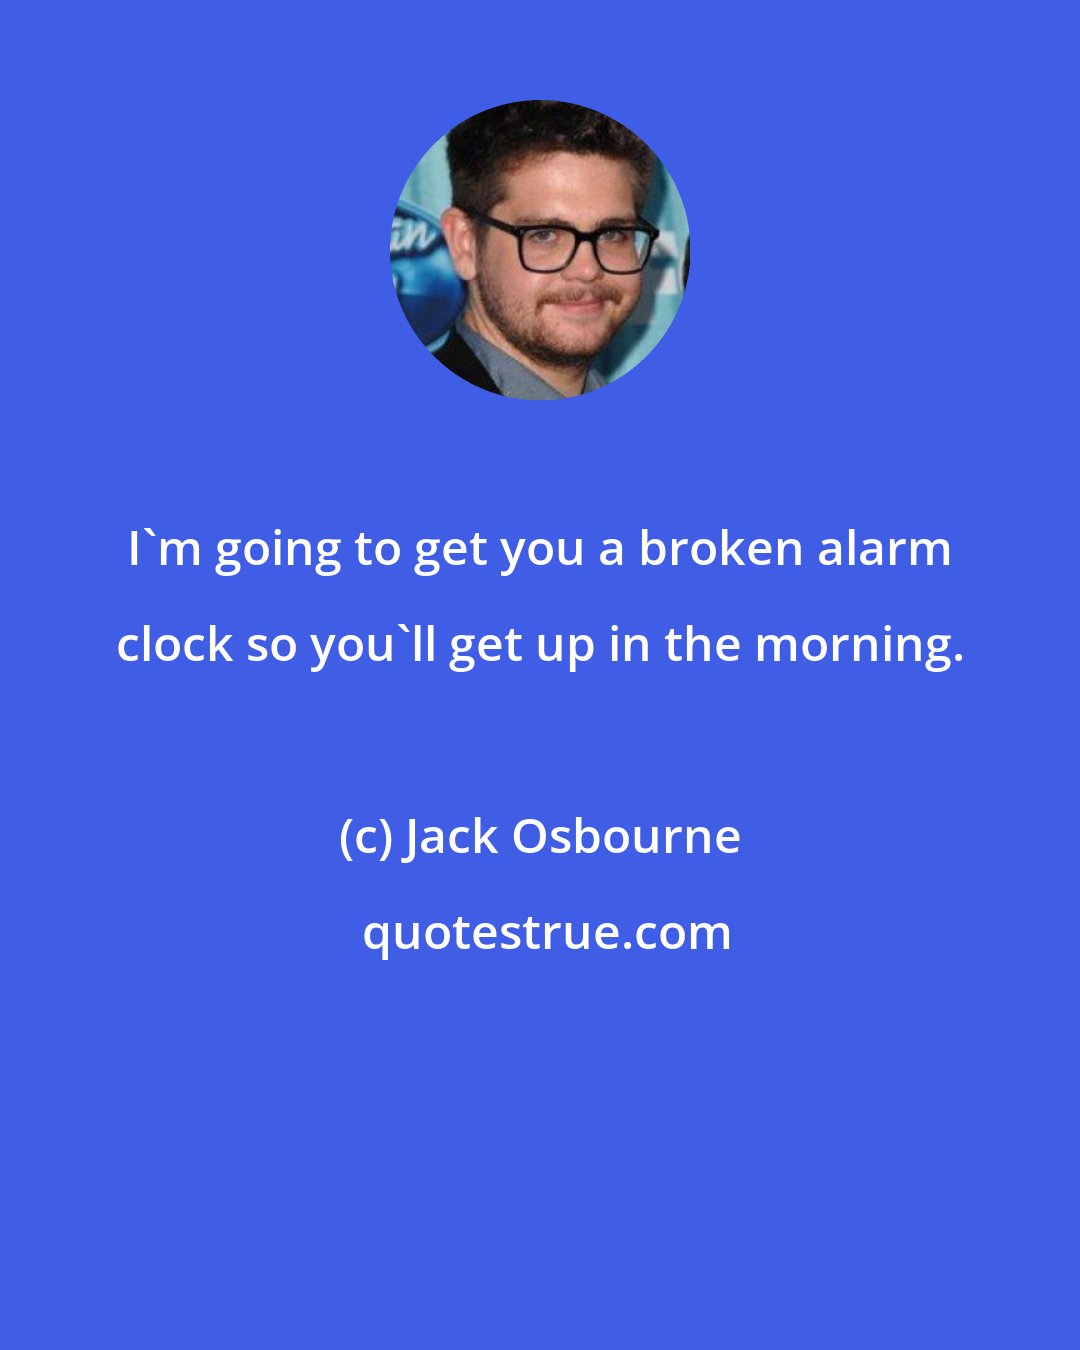 Jack Osbourne: I'm going to get you a broken alarm clock so you'll get up in the morning.